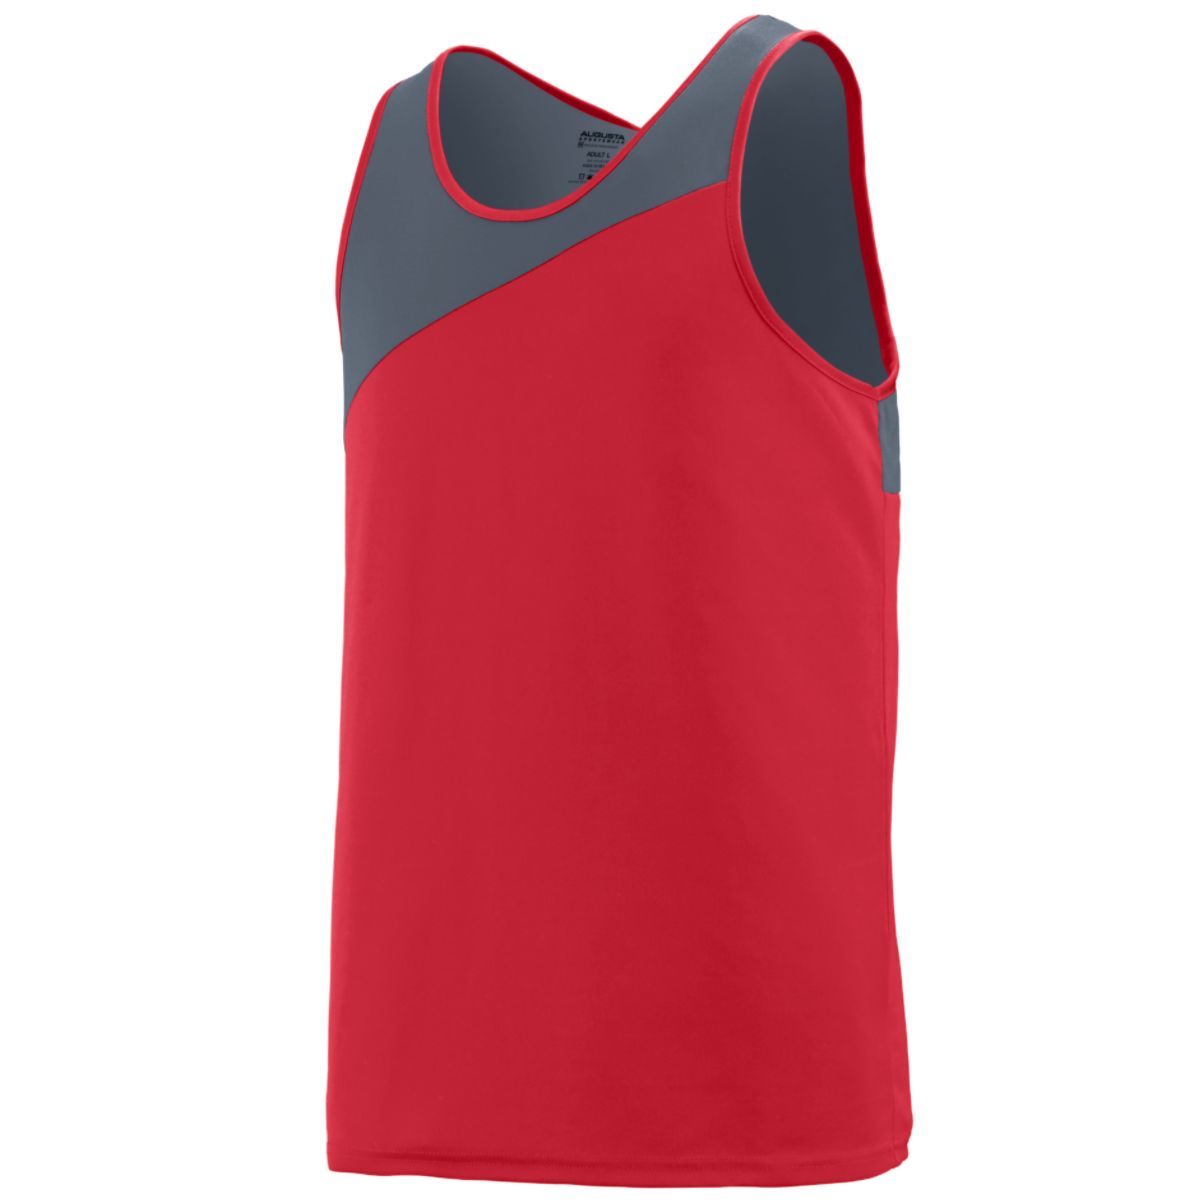 Augusta Sportswear Youth Accelerate Jersey in Red/Graphite  -Part of the Youth, Youth-Jersey, Augusta-Products, Track-Field, Shirts product lines at KanaleyCreations.com